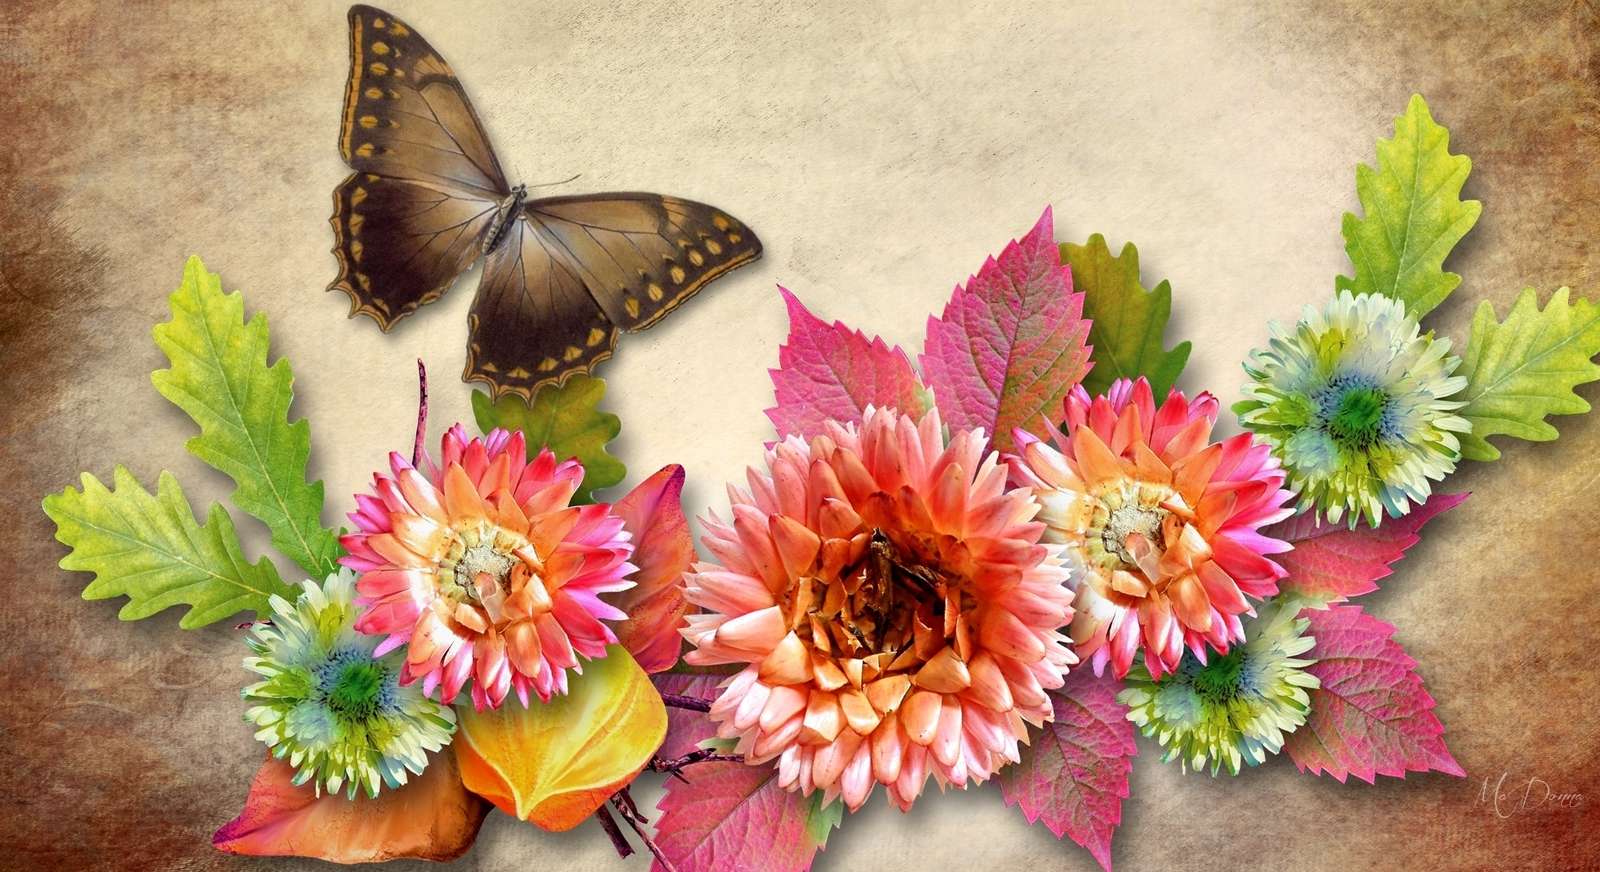 Painted flowers jigsaw puzzle online